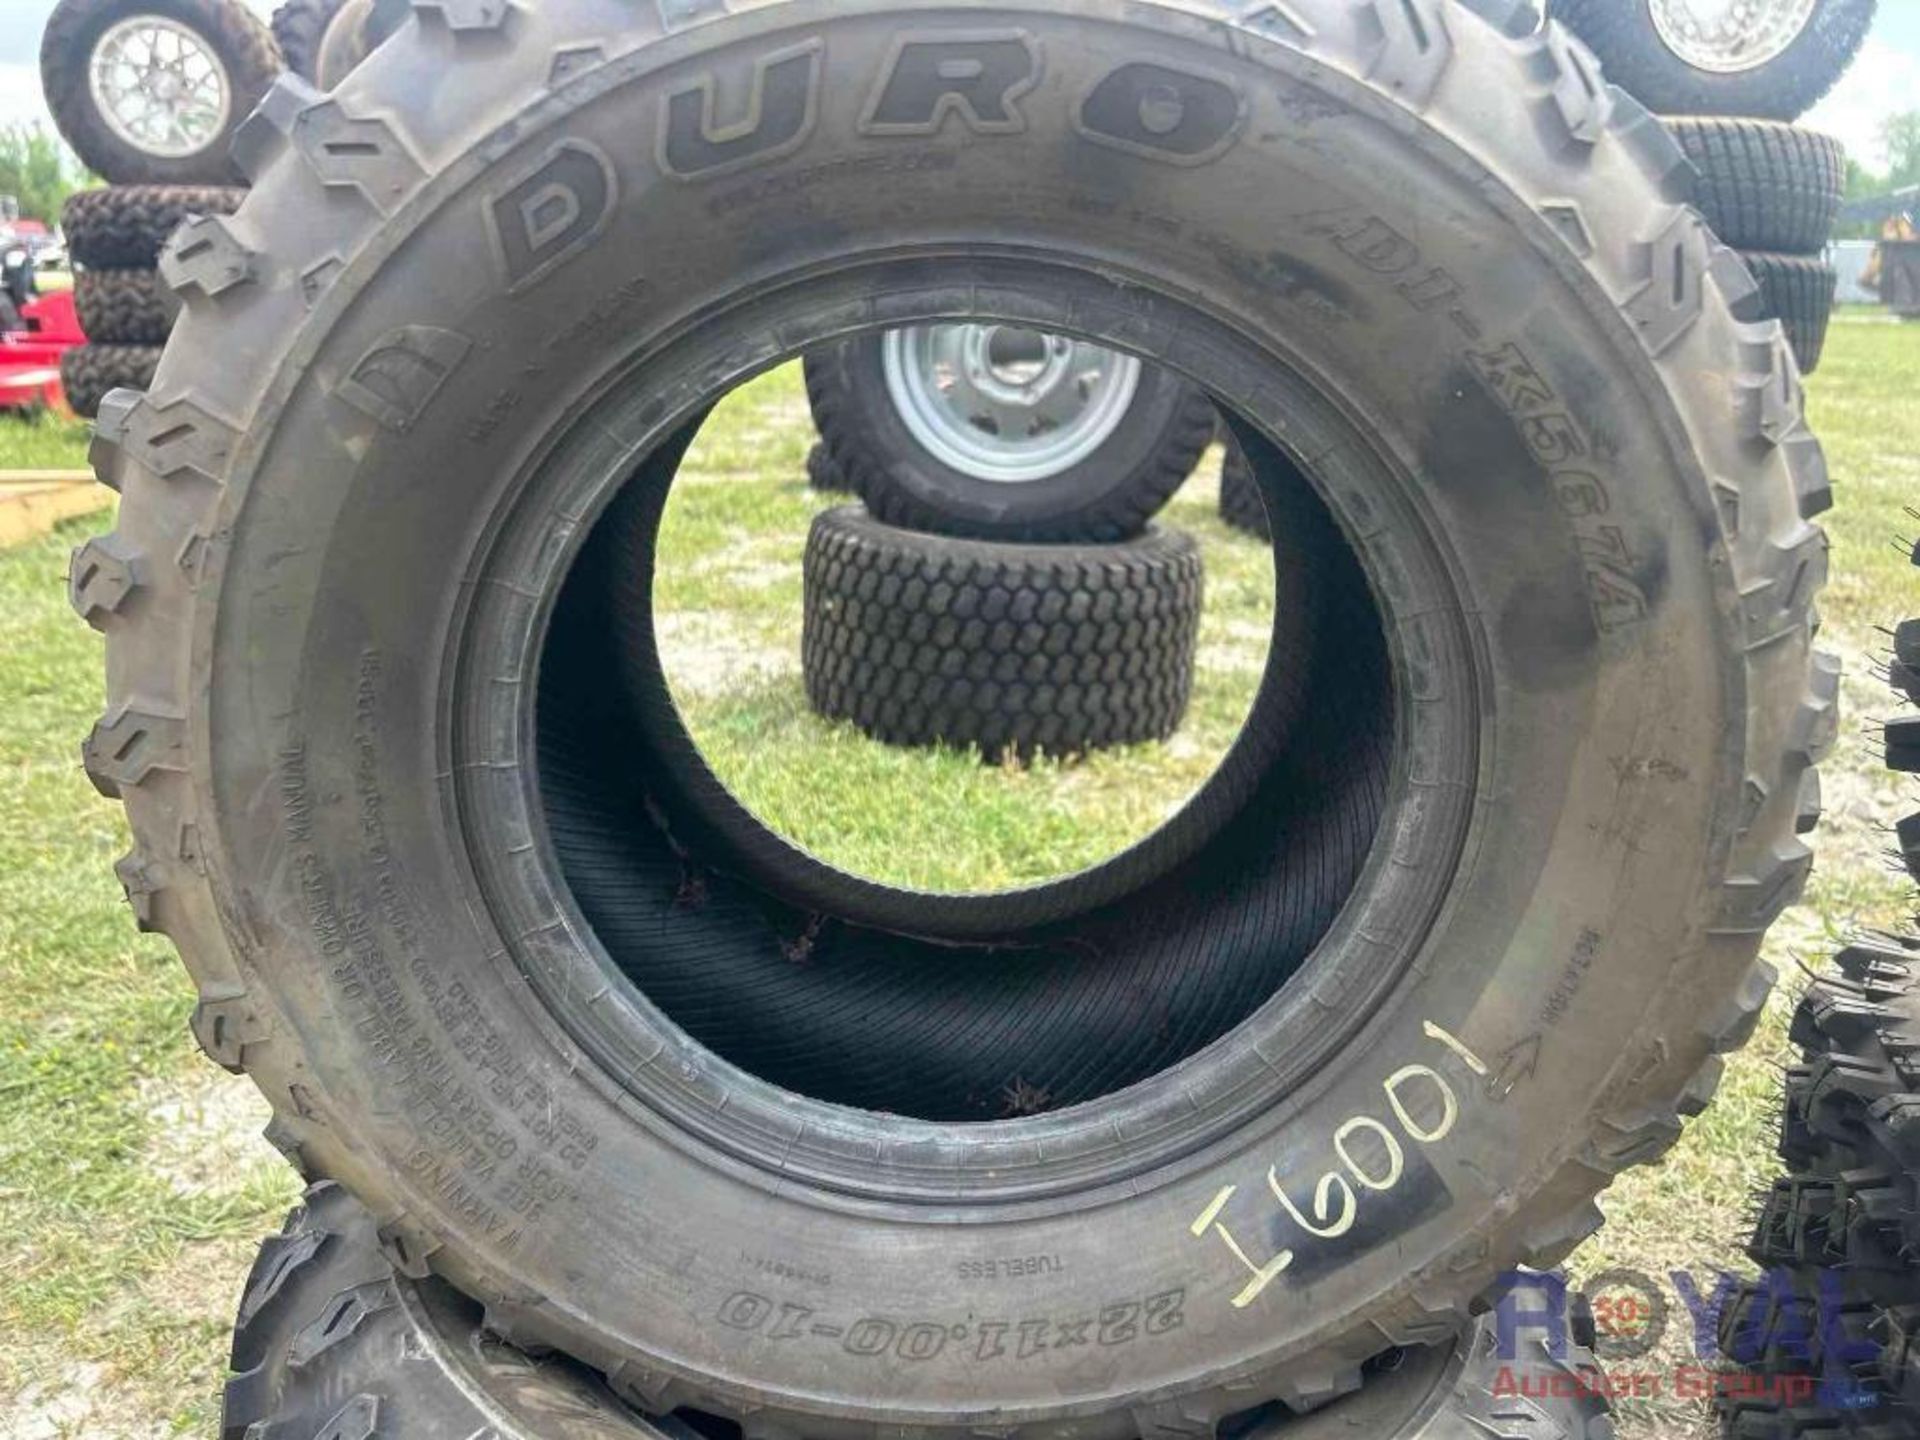 Lot of 4 Unused Tires - Image 4 of 4